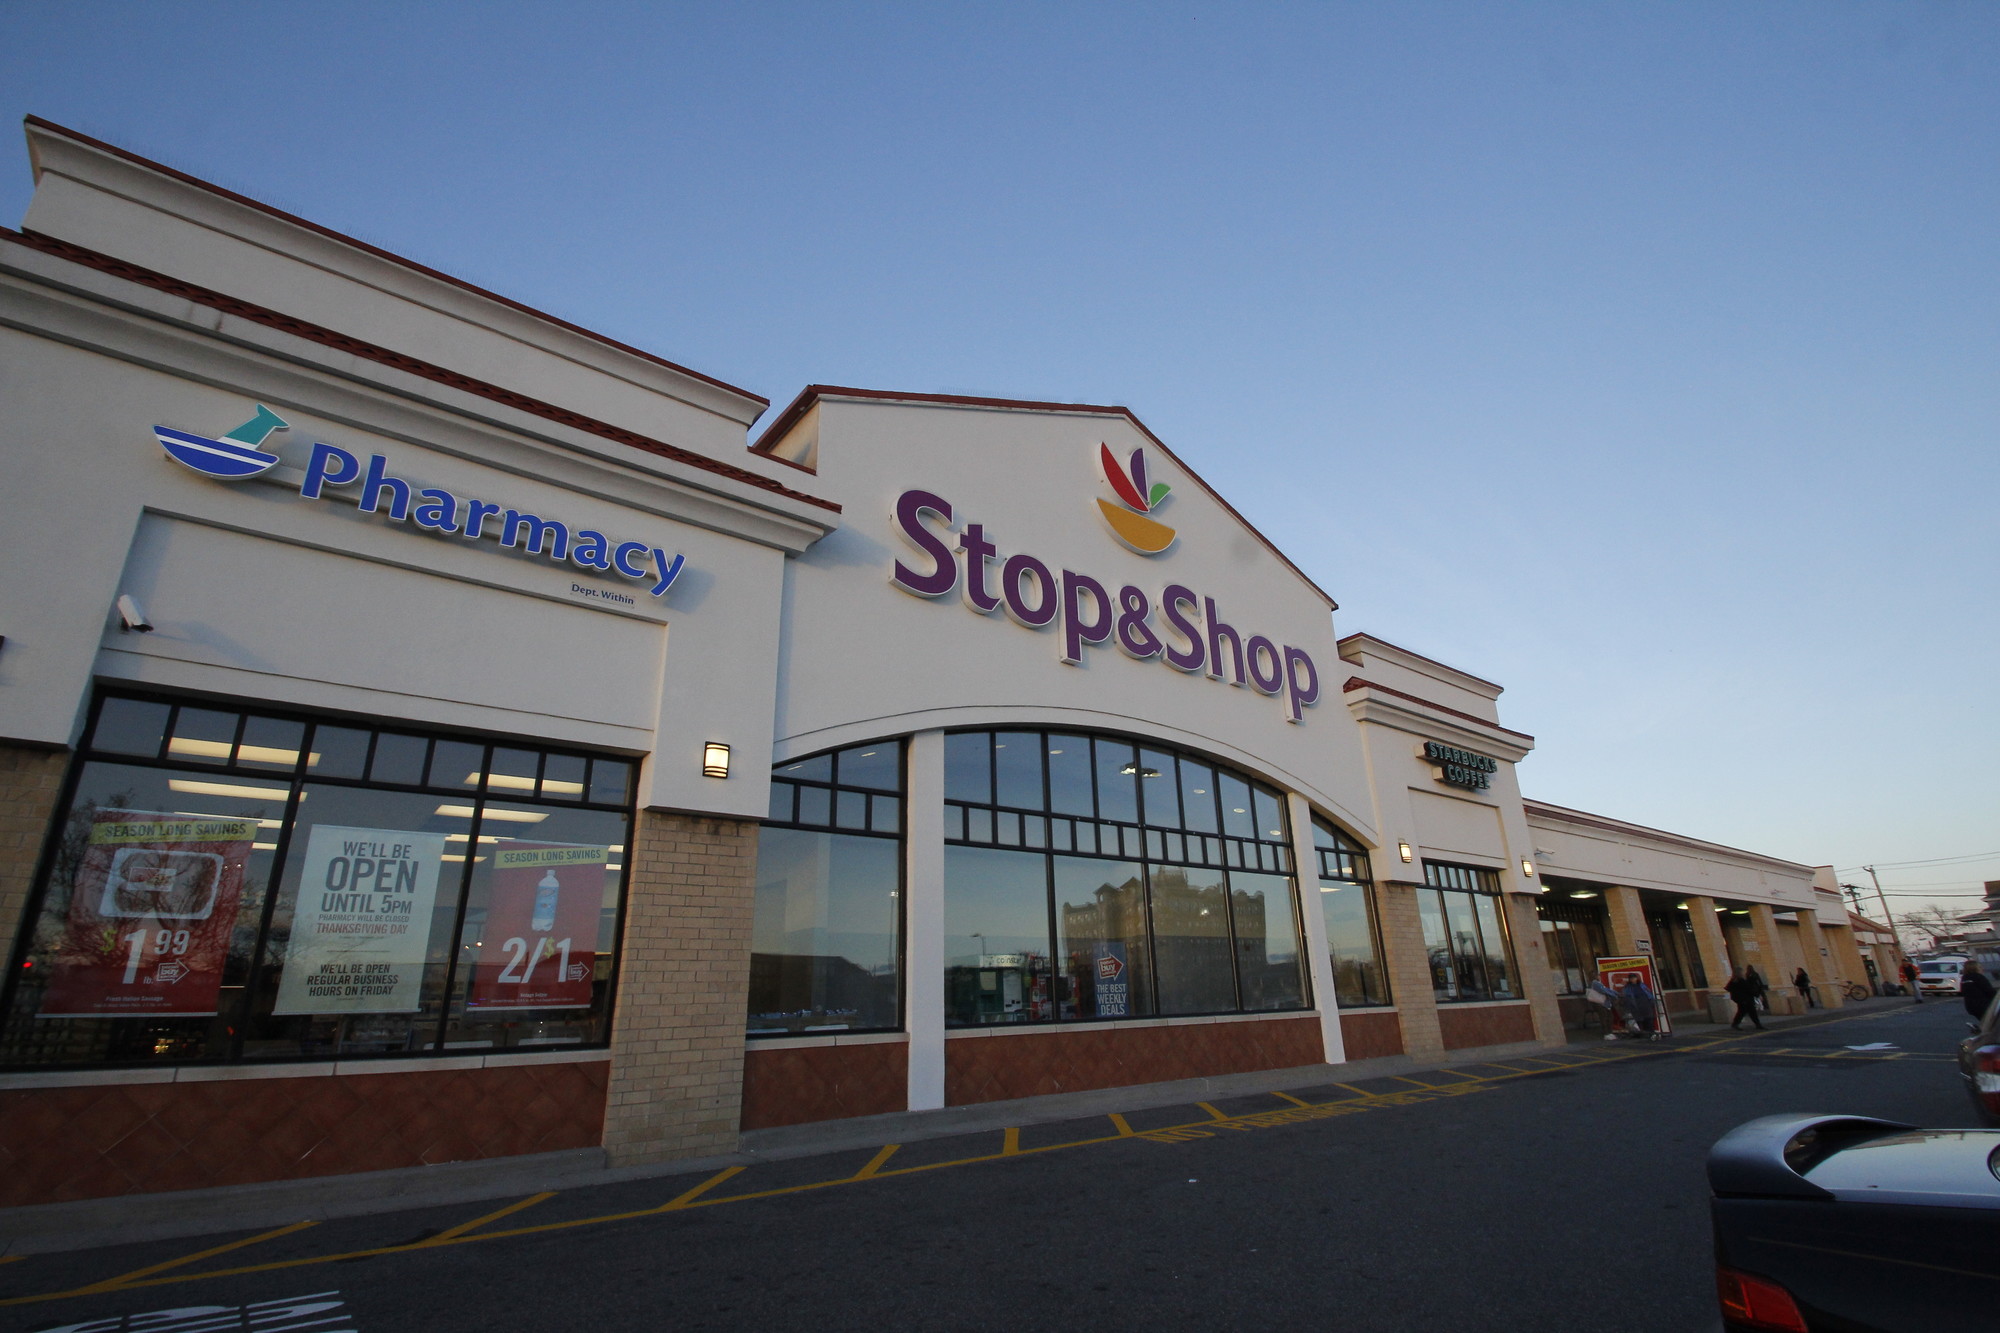 Christina Daly/Herald
Stop & Shop, at 85 E. Park Ave., opened on Nov. 13 at the former Waldbaum’s space. It has assumed the 99-year lease that began in 1983.